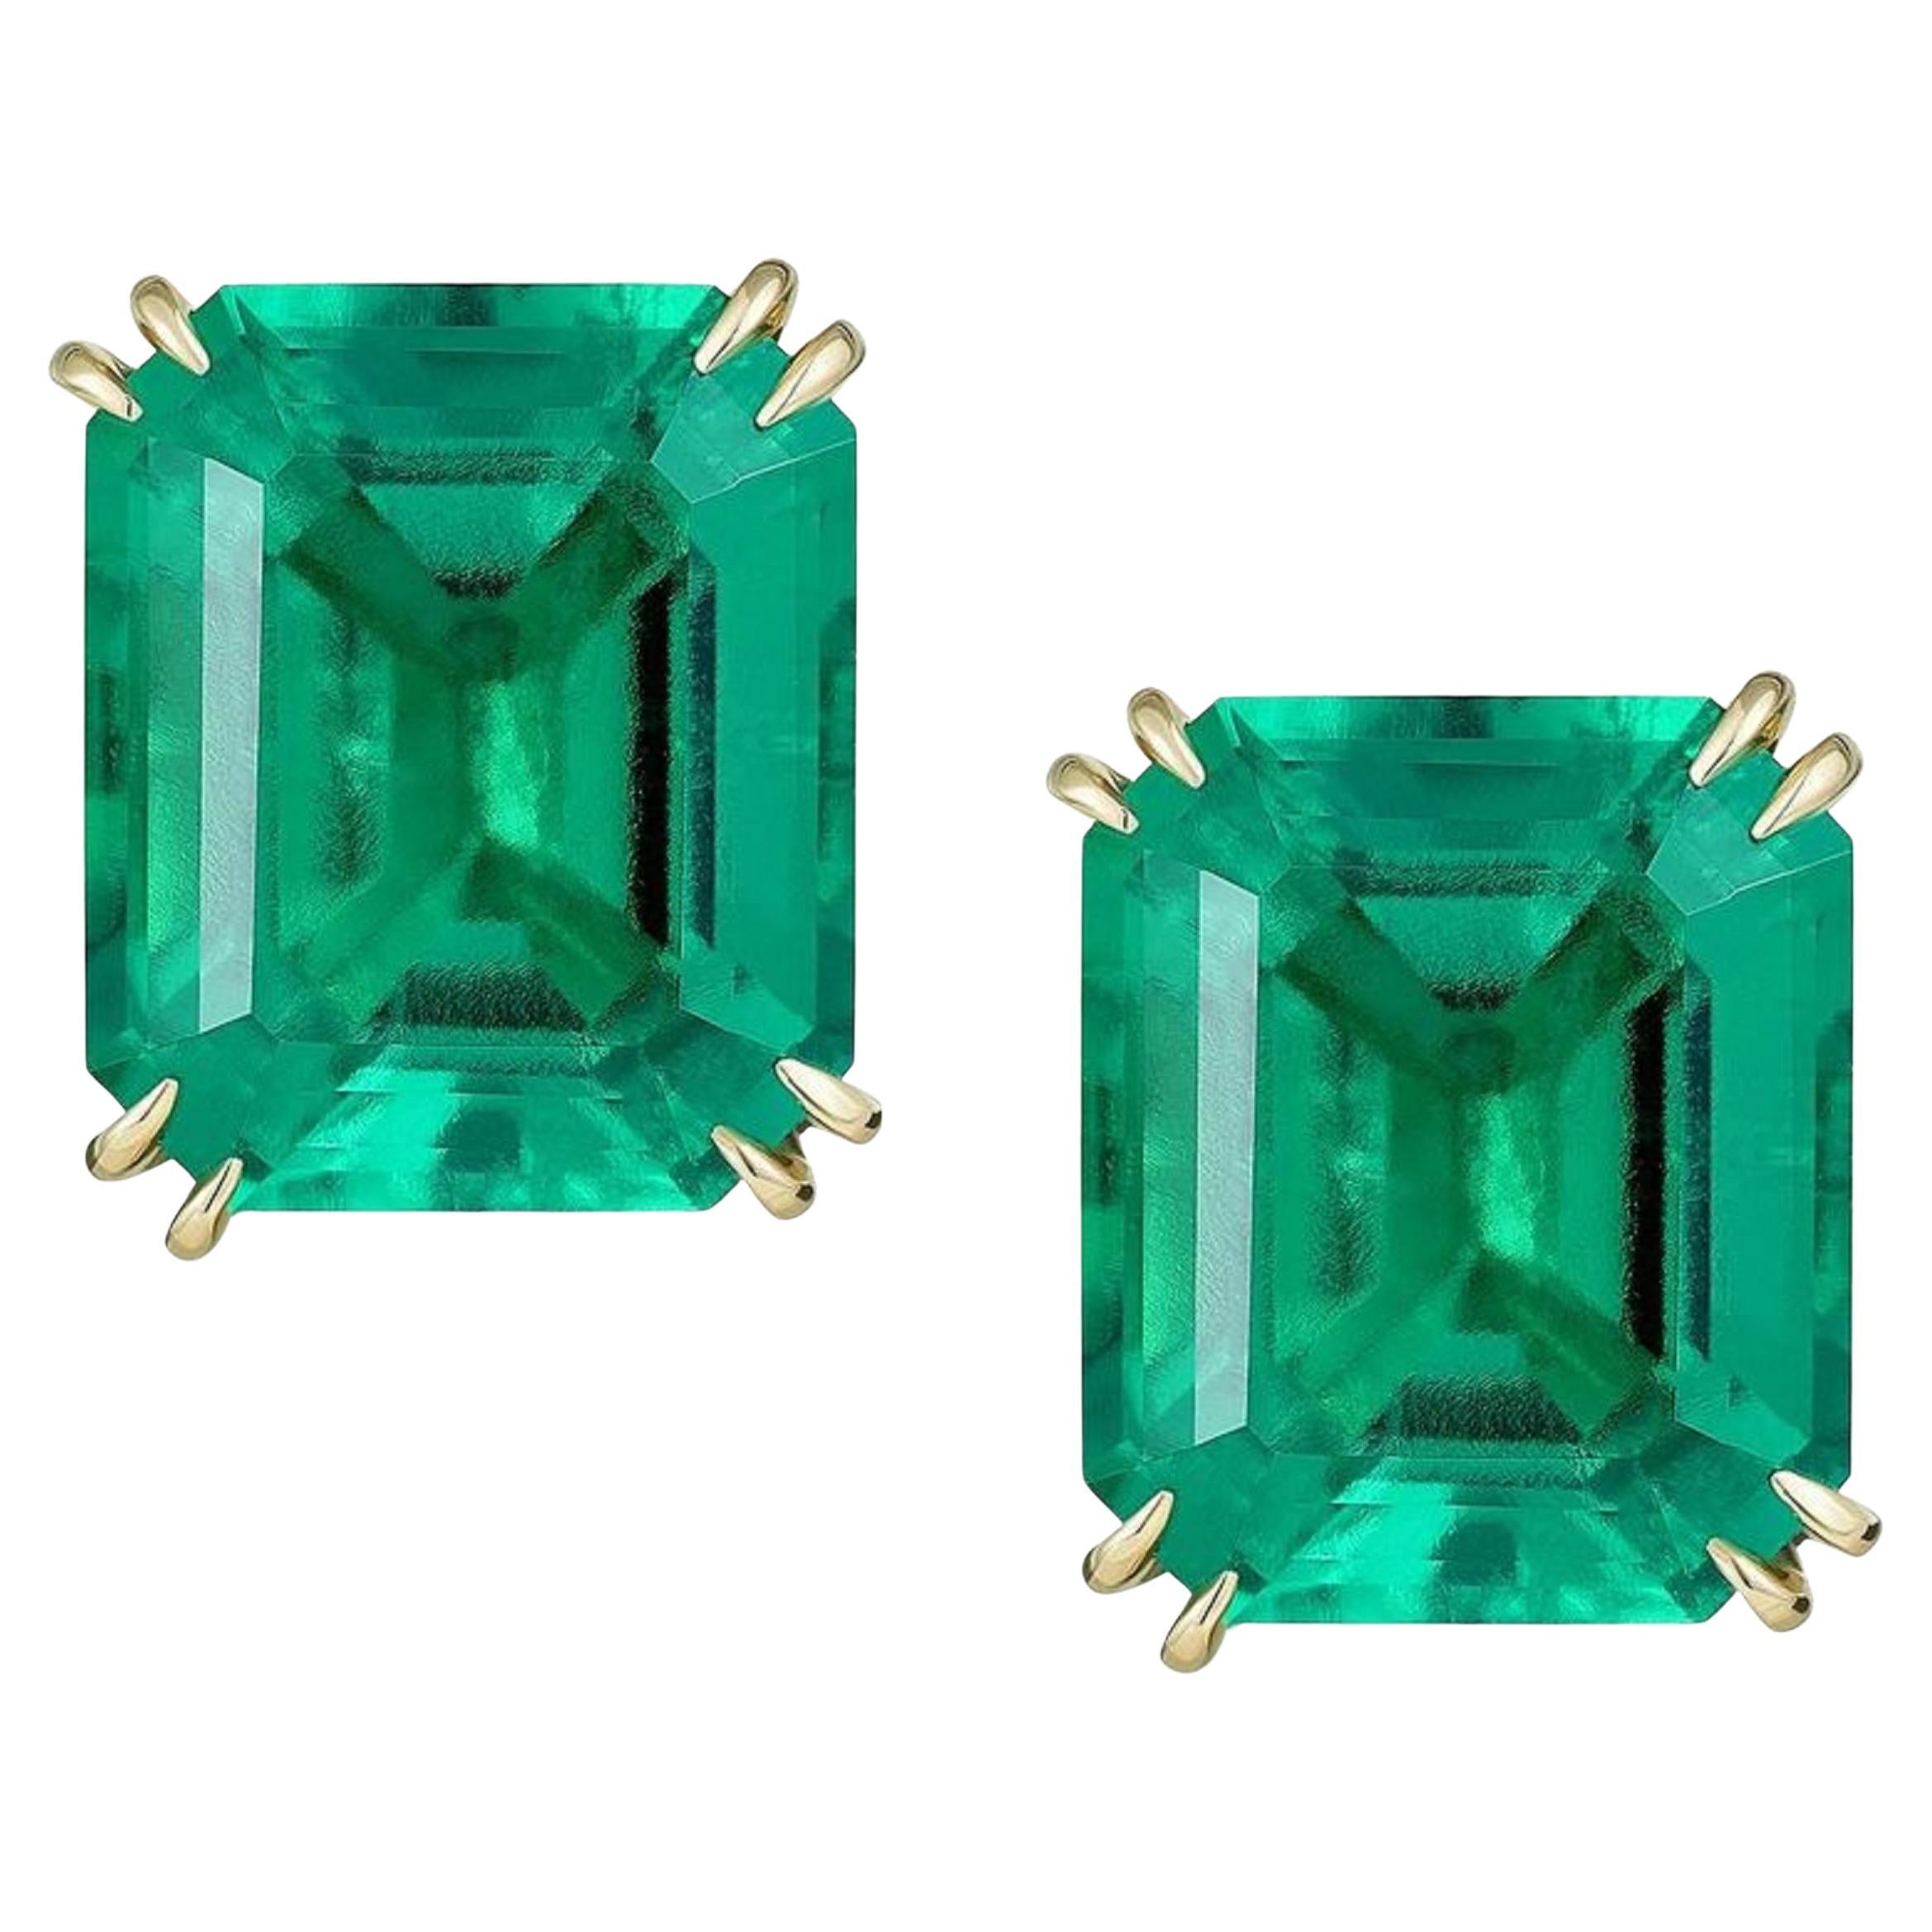 An exquisite pair of investment grade emeralds that sum 4.70 carats

this pair of emeralds have the perfect deep green and excellent luster and they also have almost no imperfections very little inclusions which is extremely rare in natural stones.

